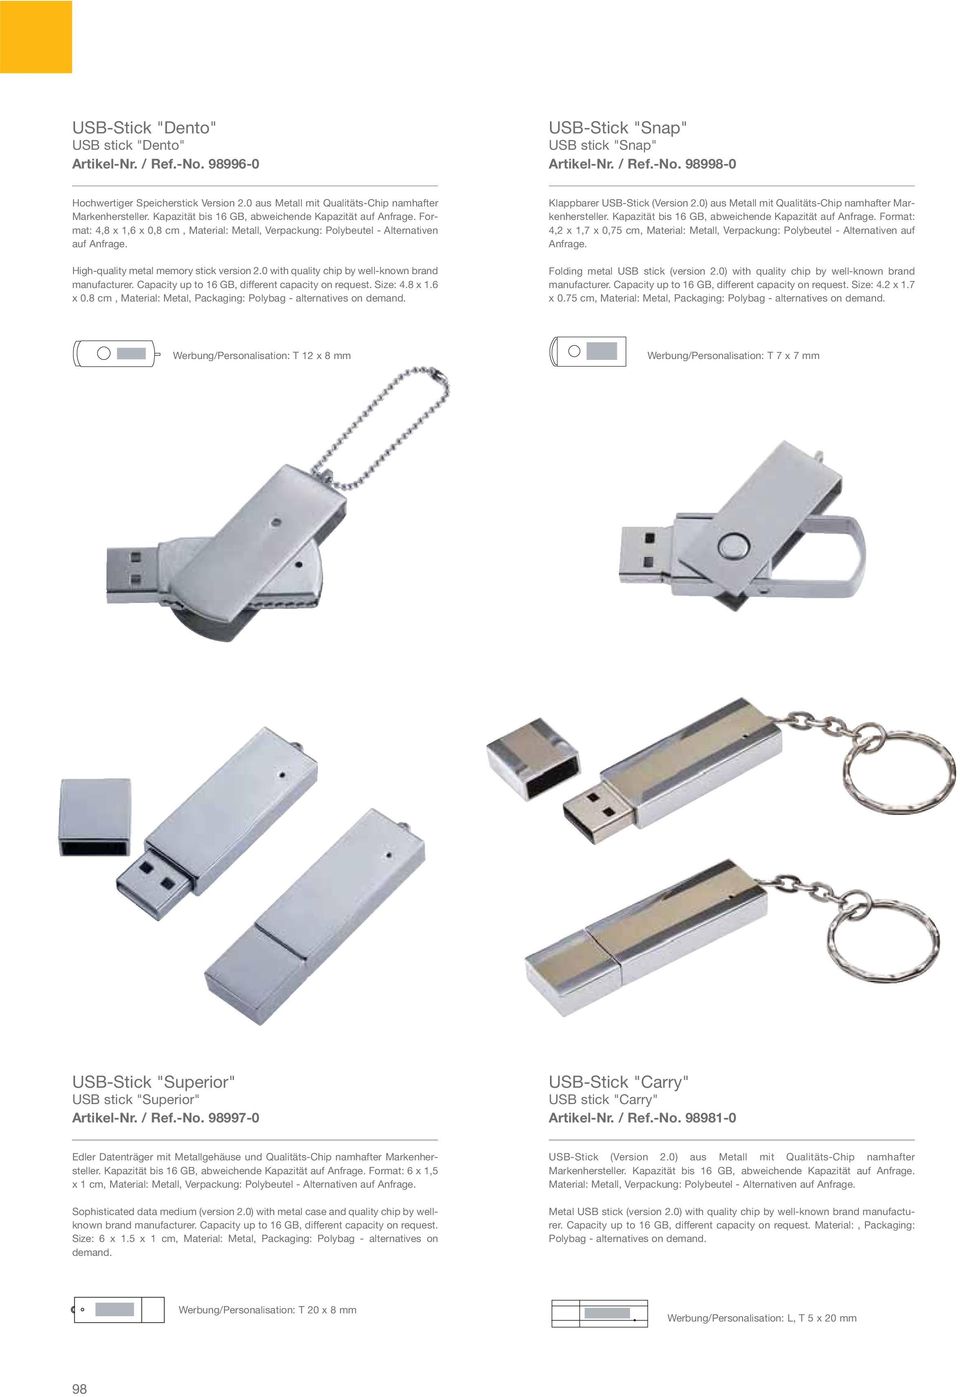 Format: 4,8 x 1,6 x 0,8 cm, Material: Metall, Verpackung: Polybeutel - Alternativen auf Anfrage. High-quality metal memory stick version 2.0 with quality chip by well-known brand manufacturer.